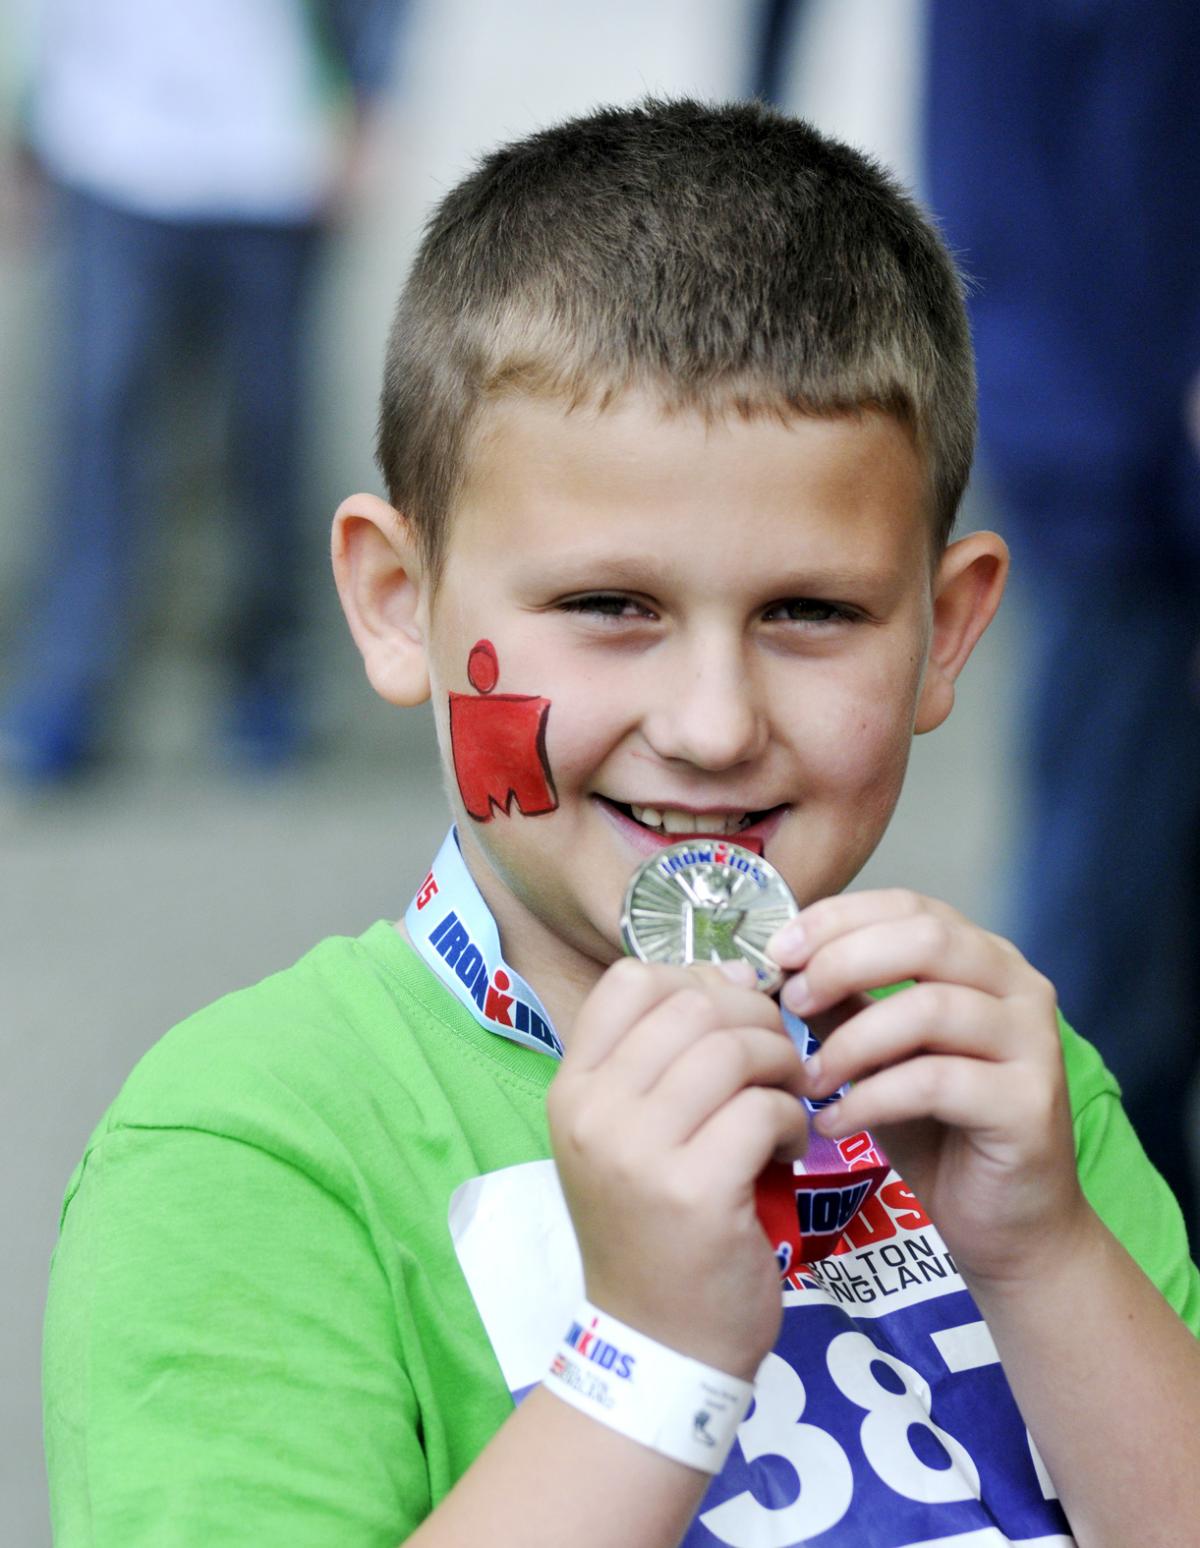 11-year-old Ryan McGill shows off his medal.